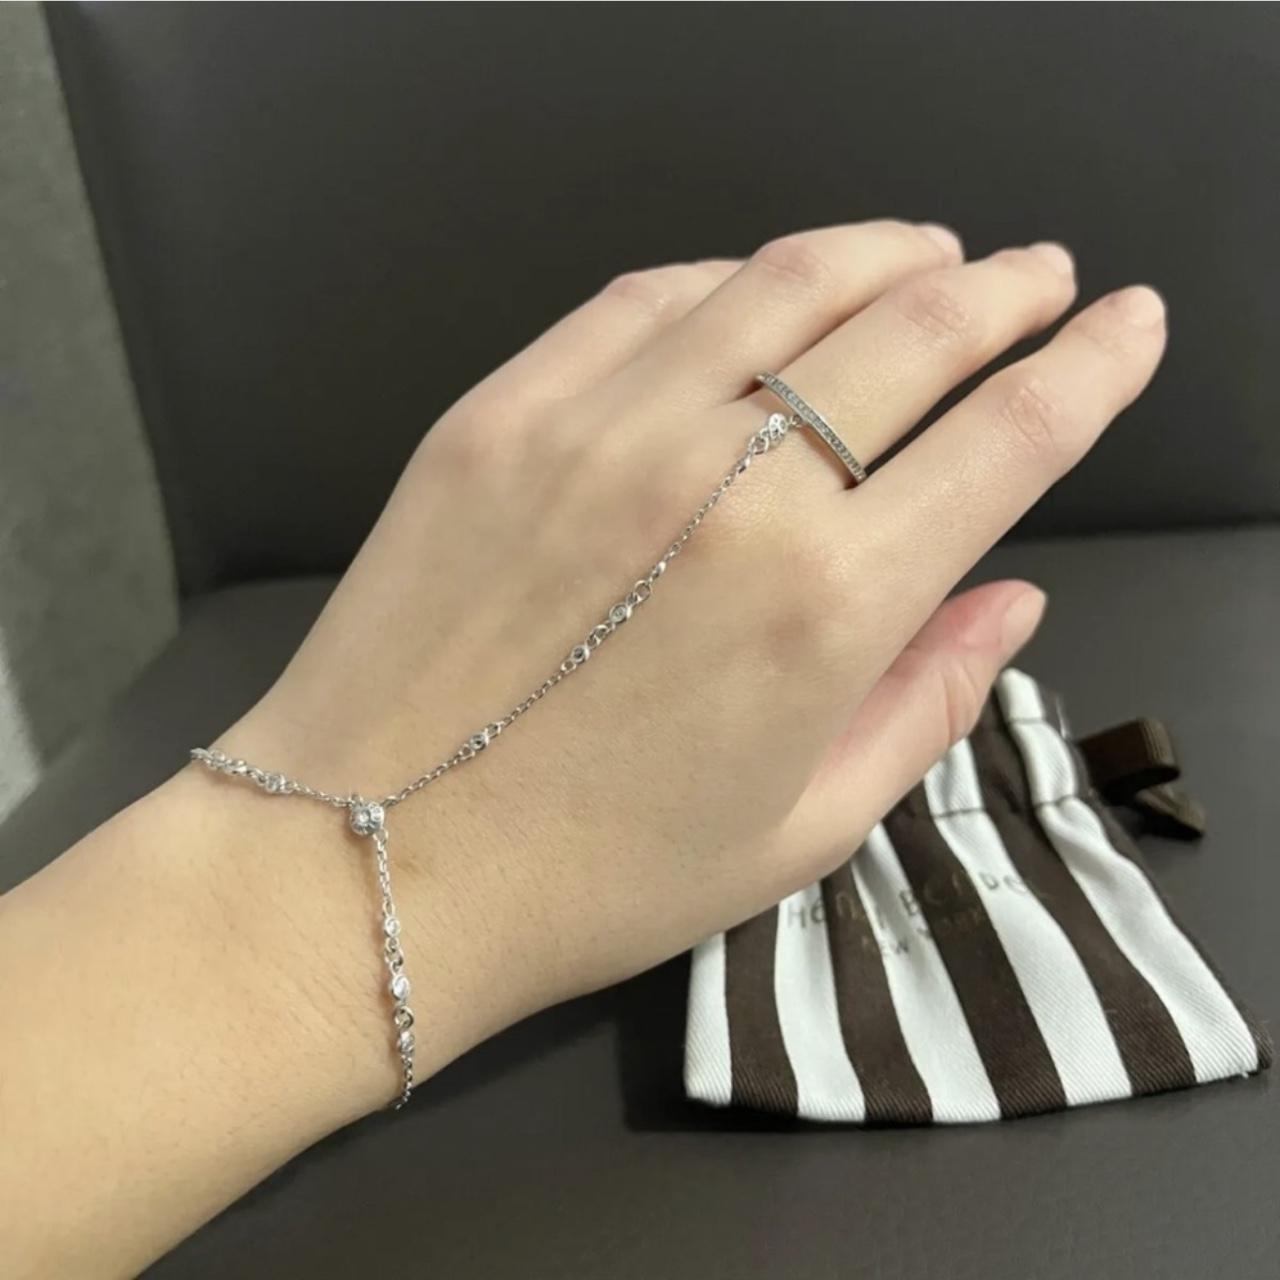 Chain Bracelet with Rings for Women Hollow Crystal Ring Connected Finger  Bracelets Hand Accessories Jewelry Lady Gifts